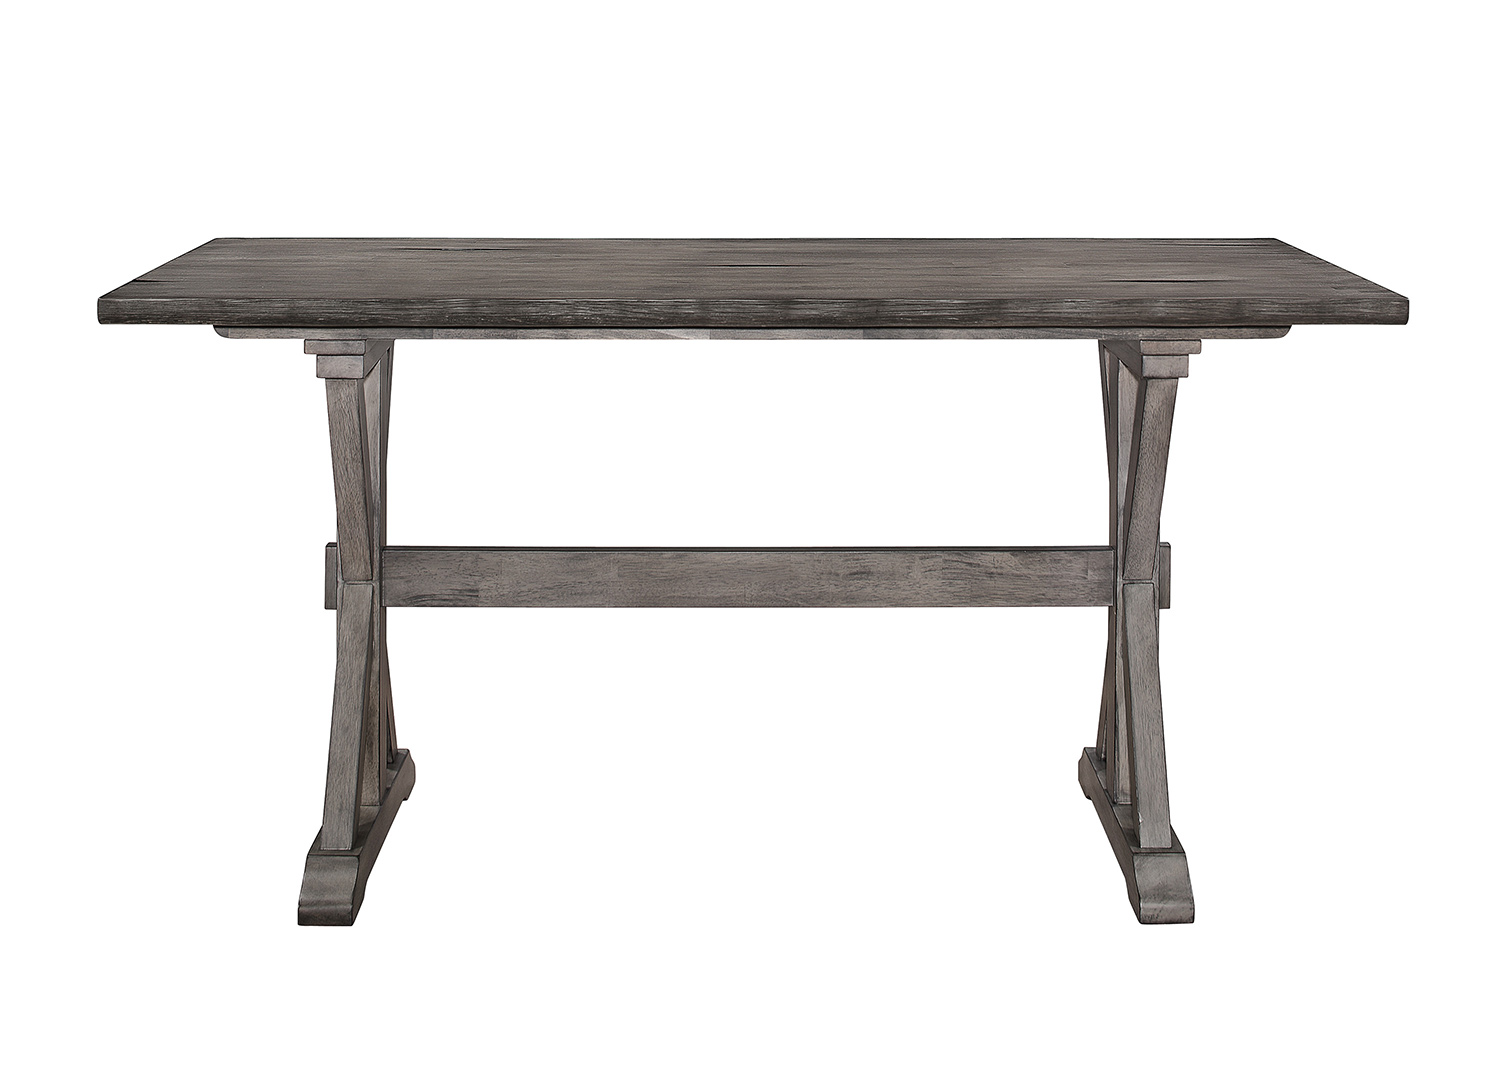 Homelegance Amsonia Counter Height Table - Rustic Gray